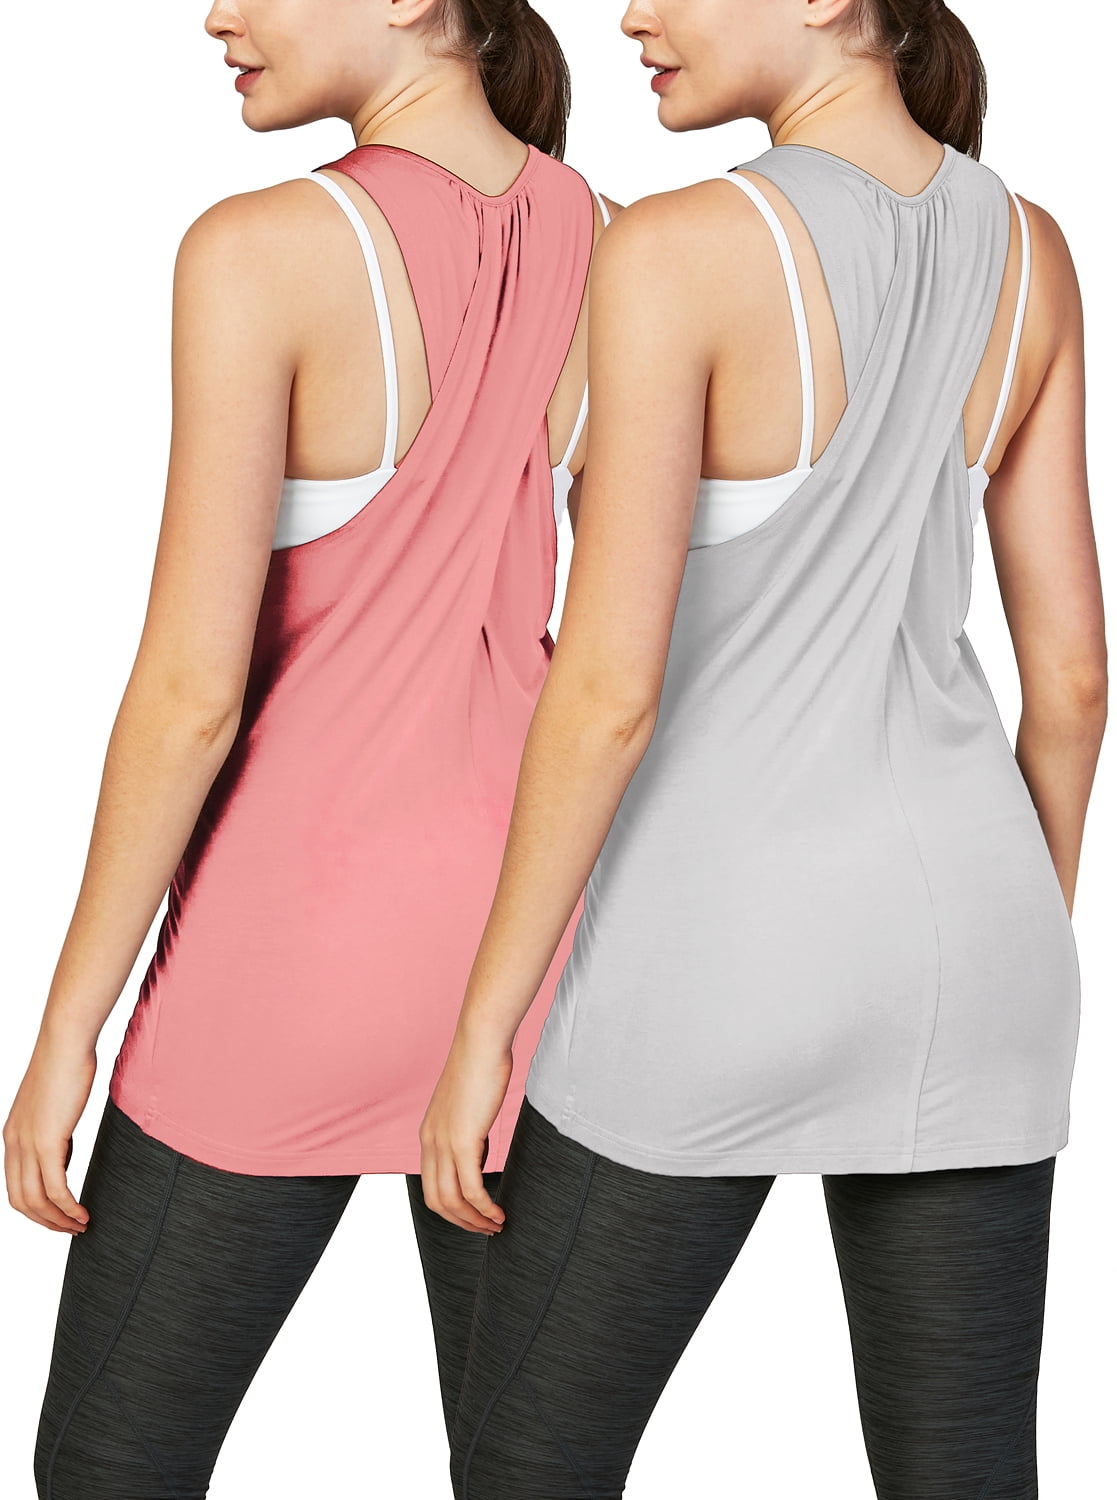 DEVOPS 2 Pack Women's Workout Tops Yoga Athletic Shirts Running